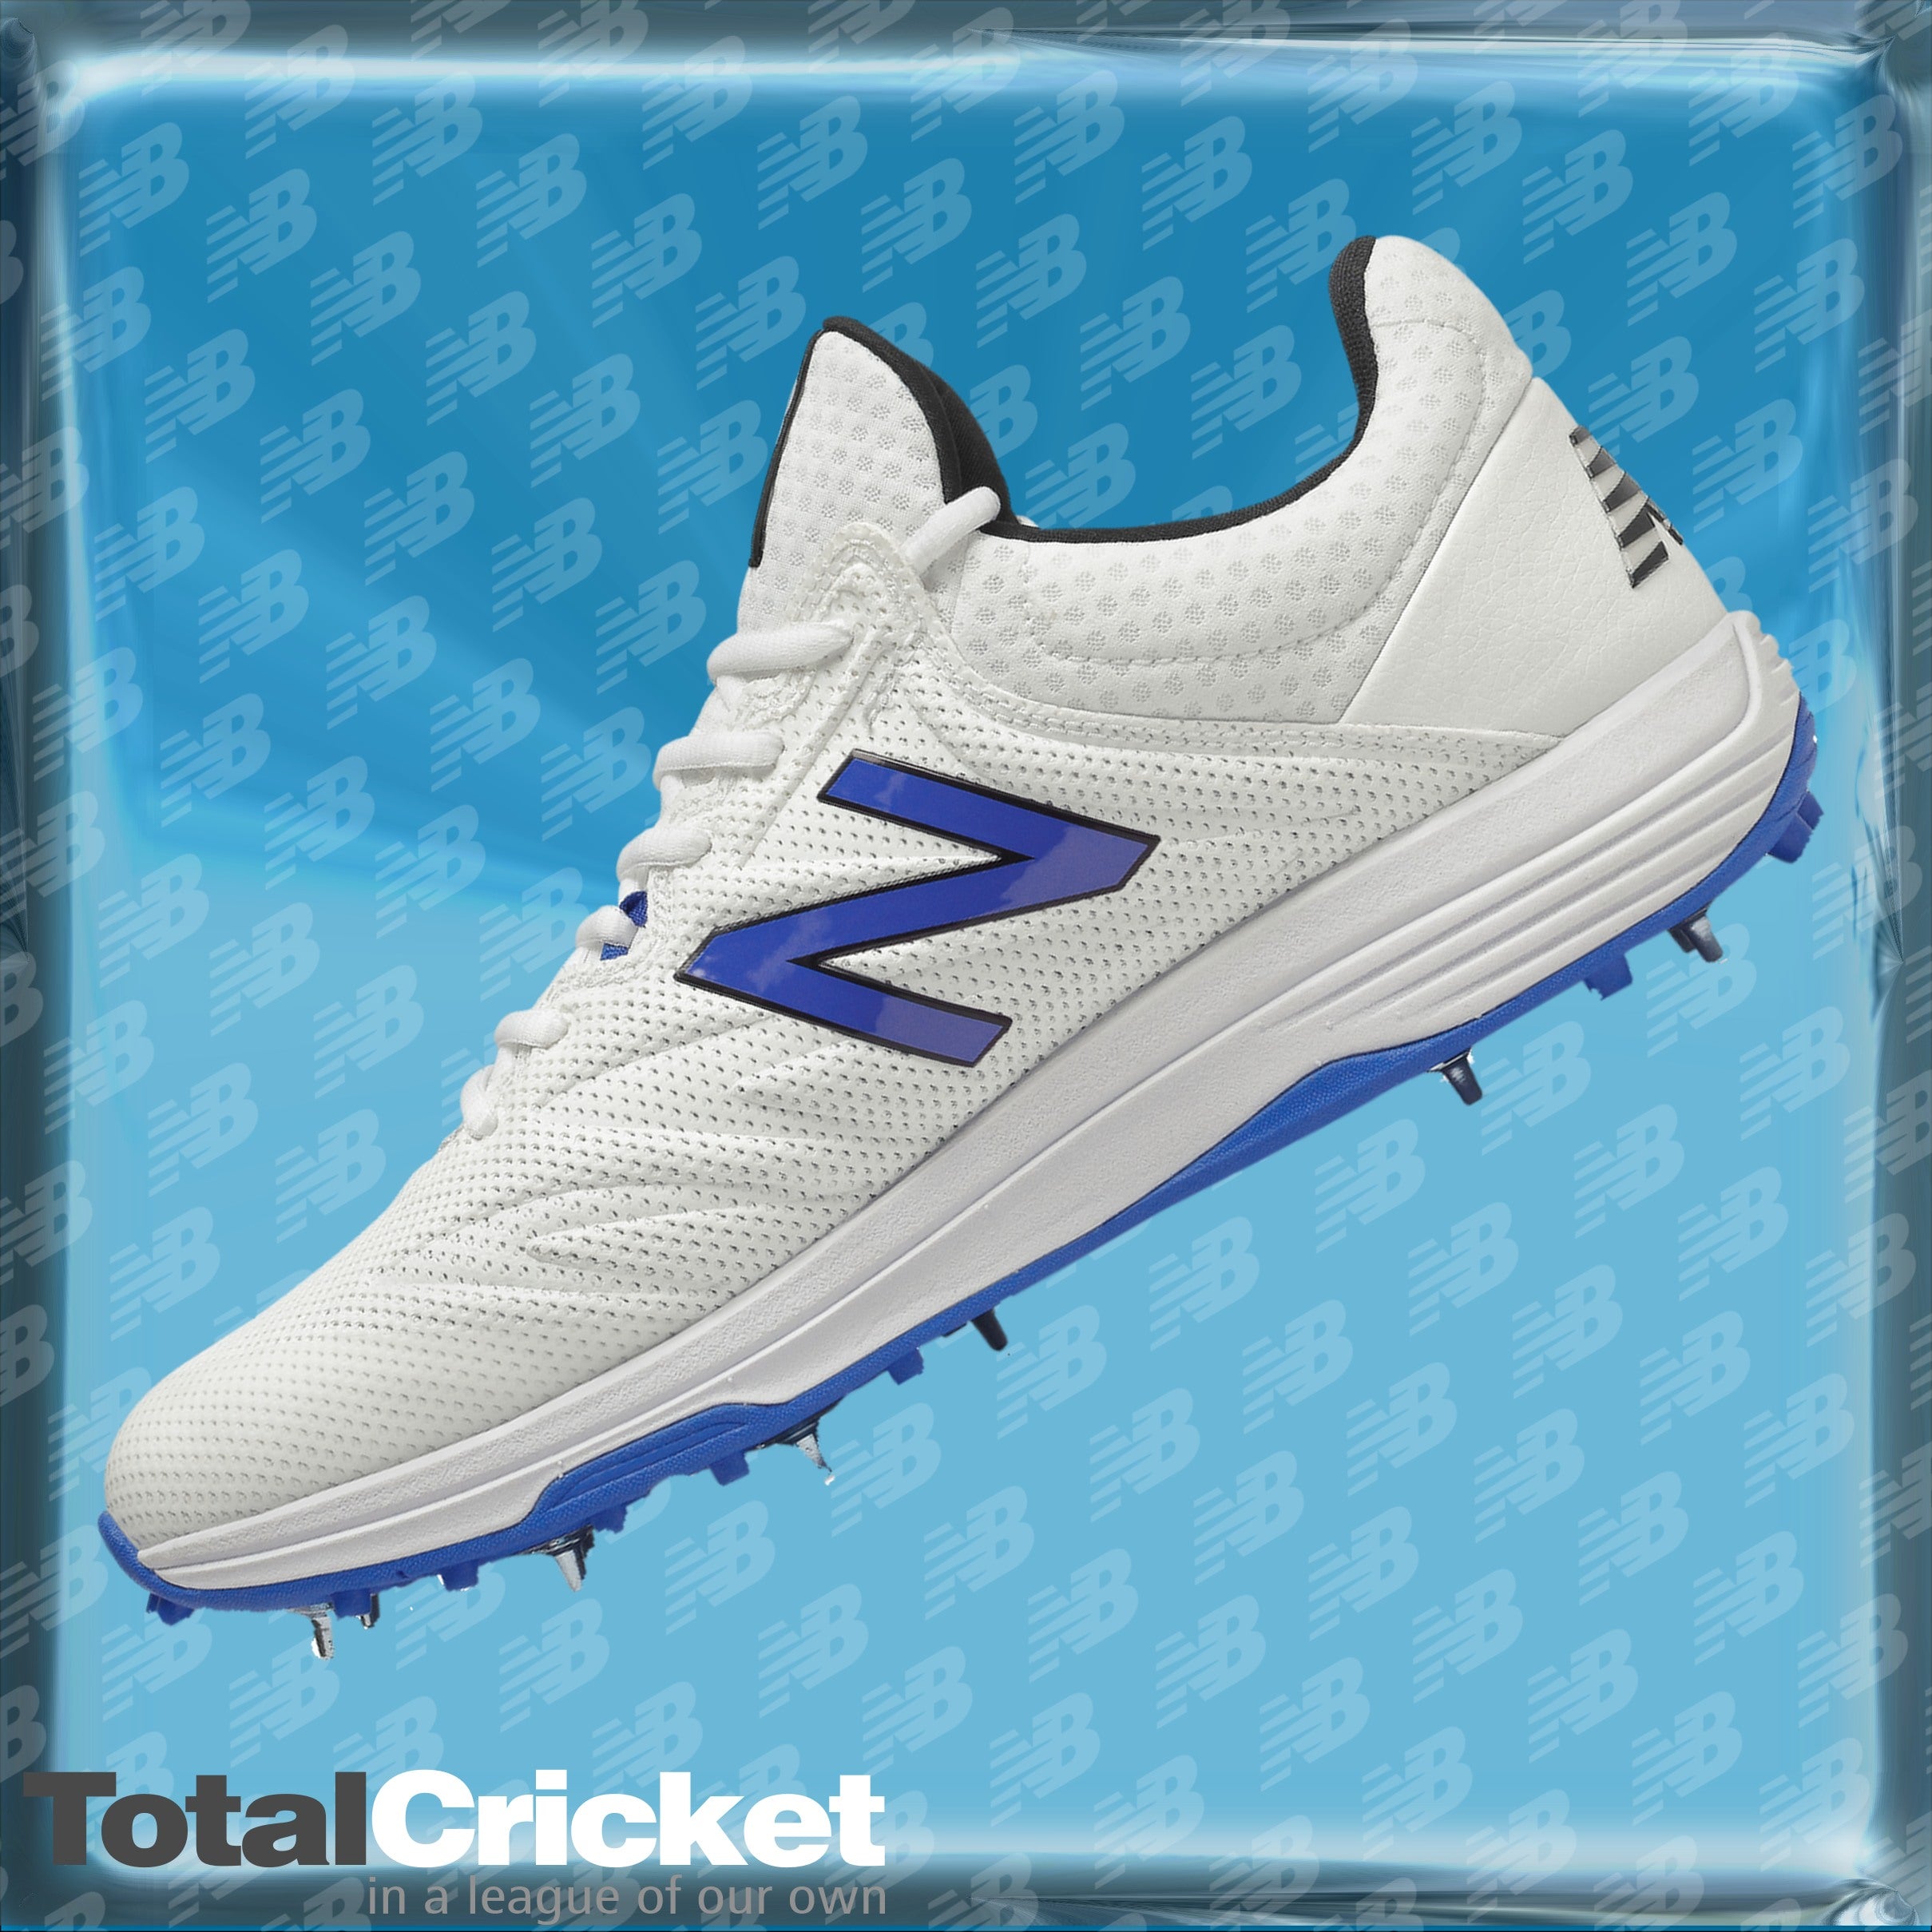 New Balance 2020 CK10 Shoes – TotalCricket